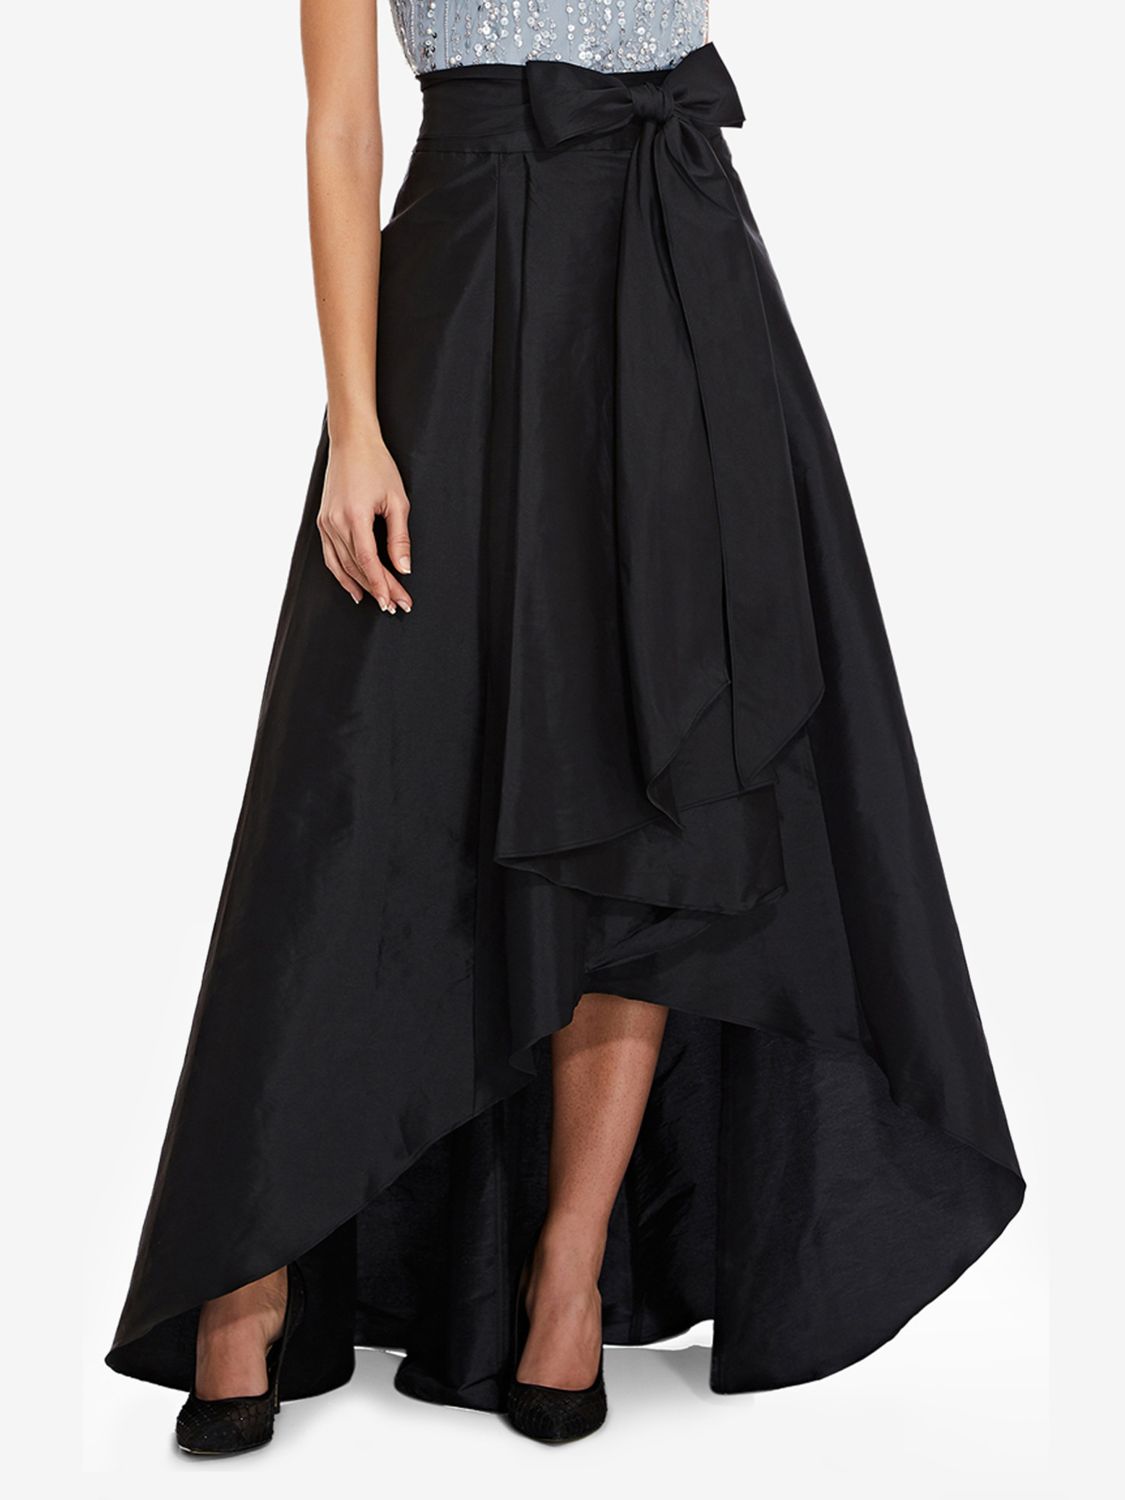 Adrianna Papell High Low Ball Skirt, Black at John Lewis & Partners